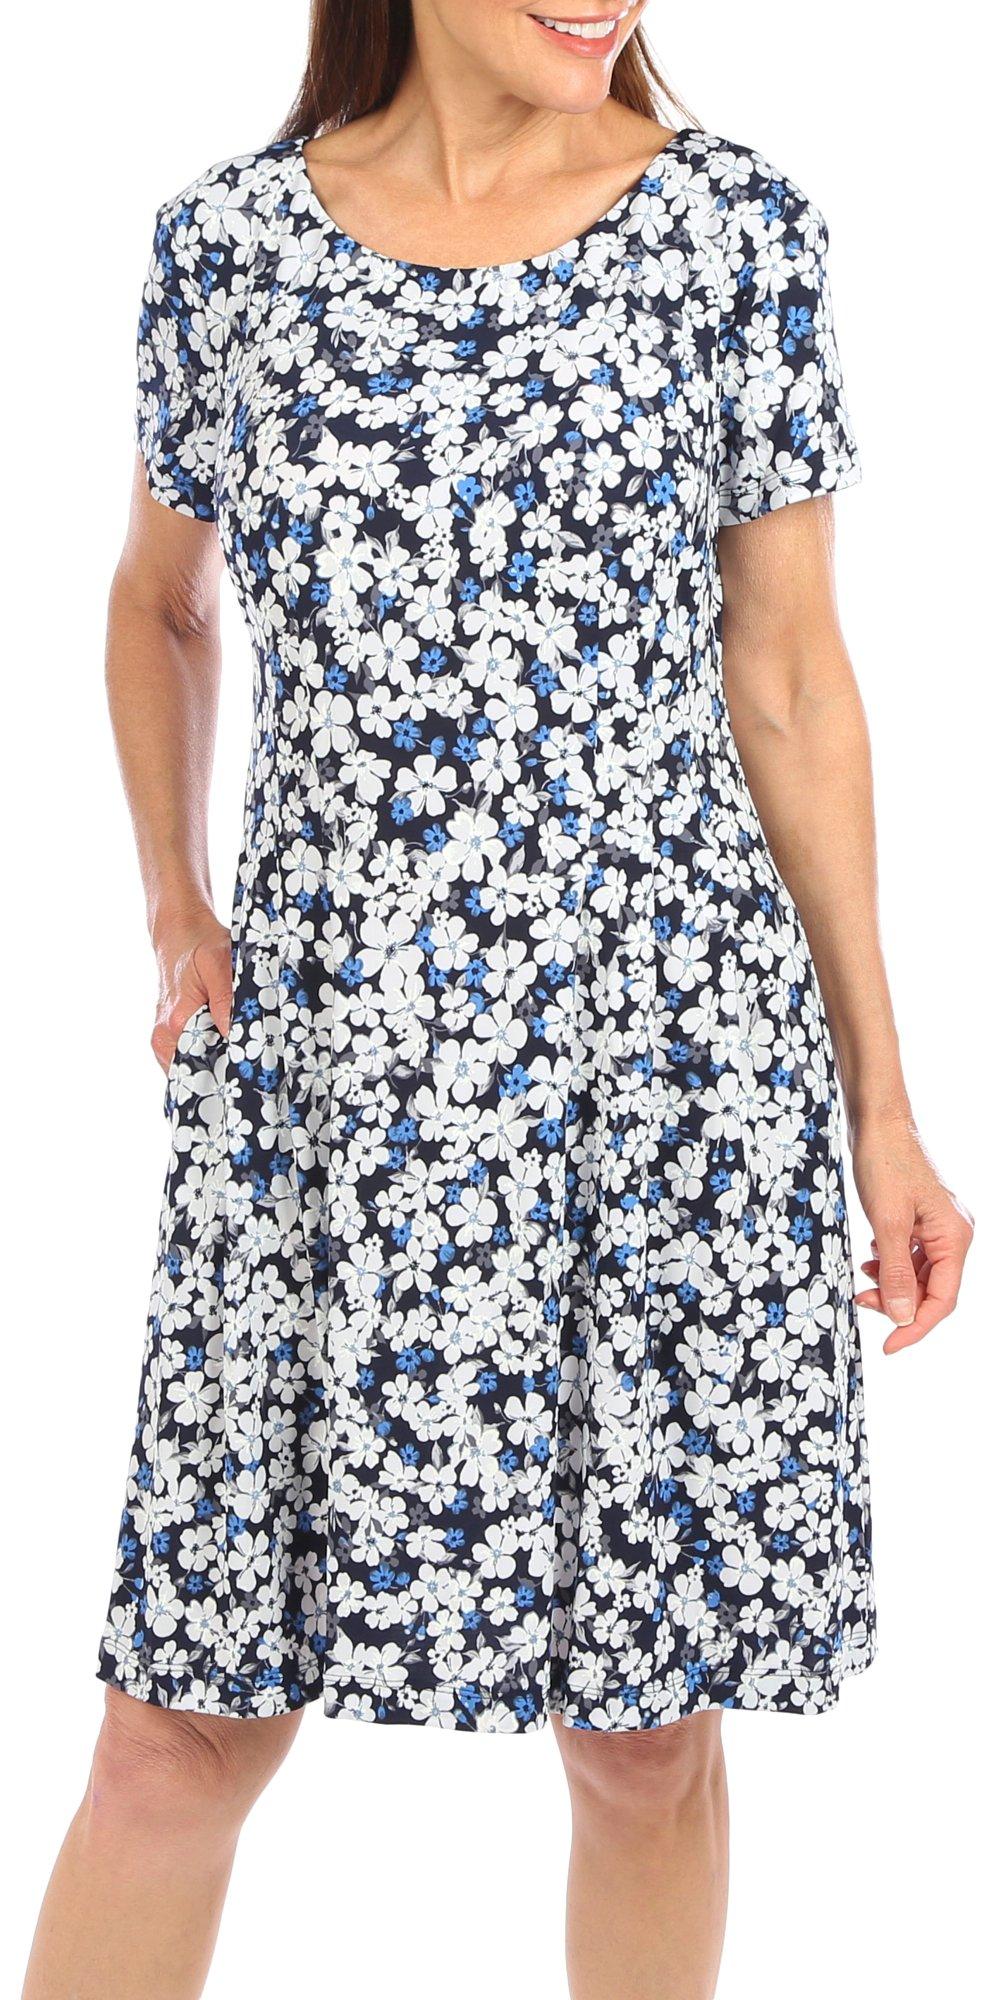 Connected Apparel Womens Floral Sundress